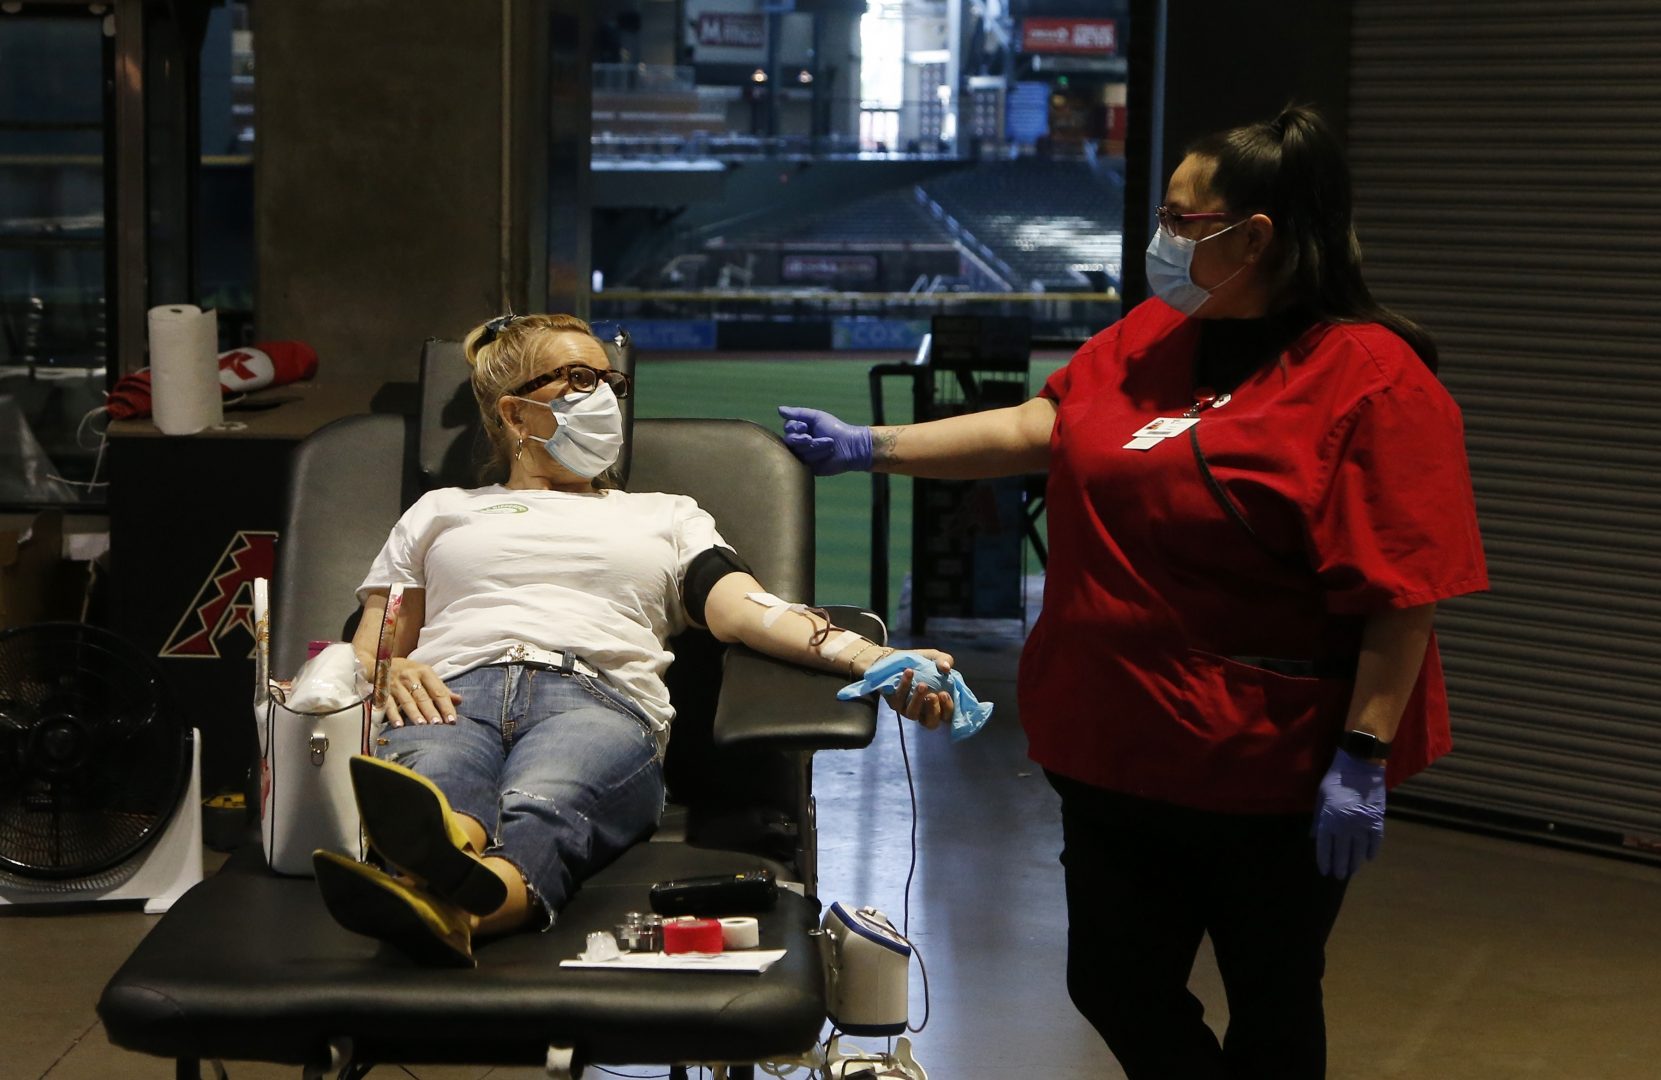 A person donates blood as they talk with an American Red Cross staffer during a Red Cross and Arizona Diamondbacks baseball team blood drive at Chase Field Tuesday, April 28, 2020, in Phoenix. According to the Red Cross, as of April 5, nearly 14,000 Red Cross blood drives have been canceled across the country due to coronavirus concerns, resulting in more than 400,000 fewer blood donations.